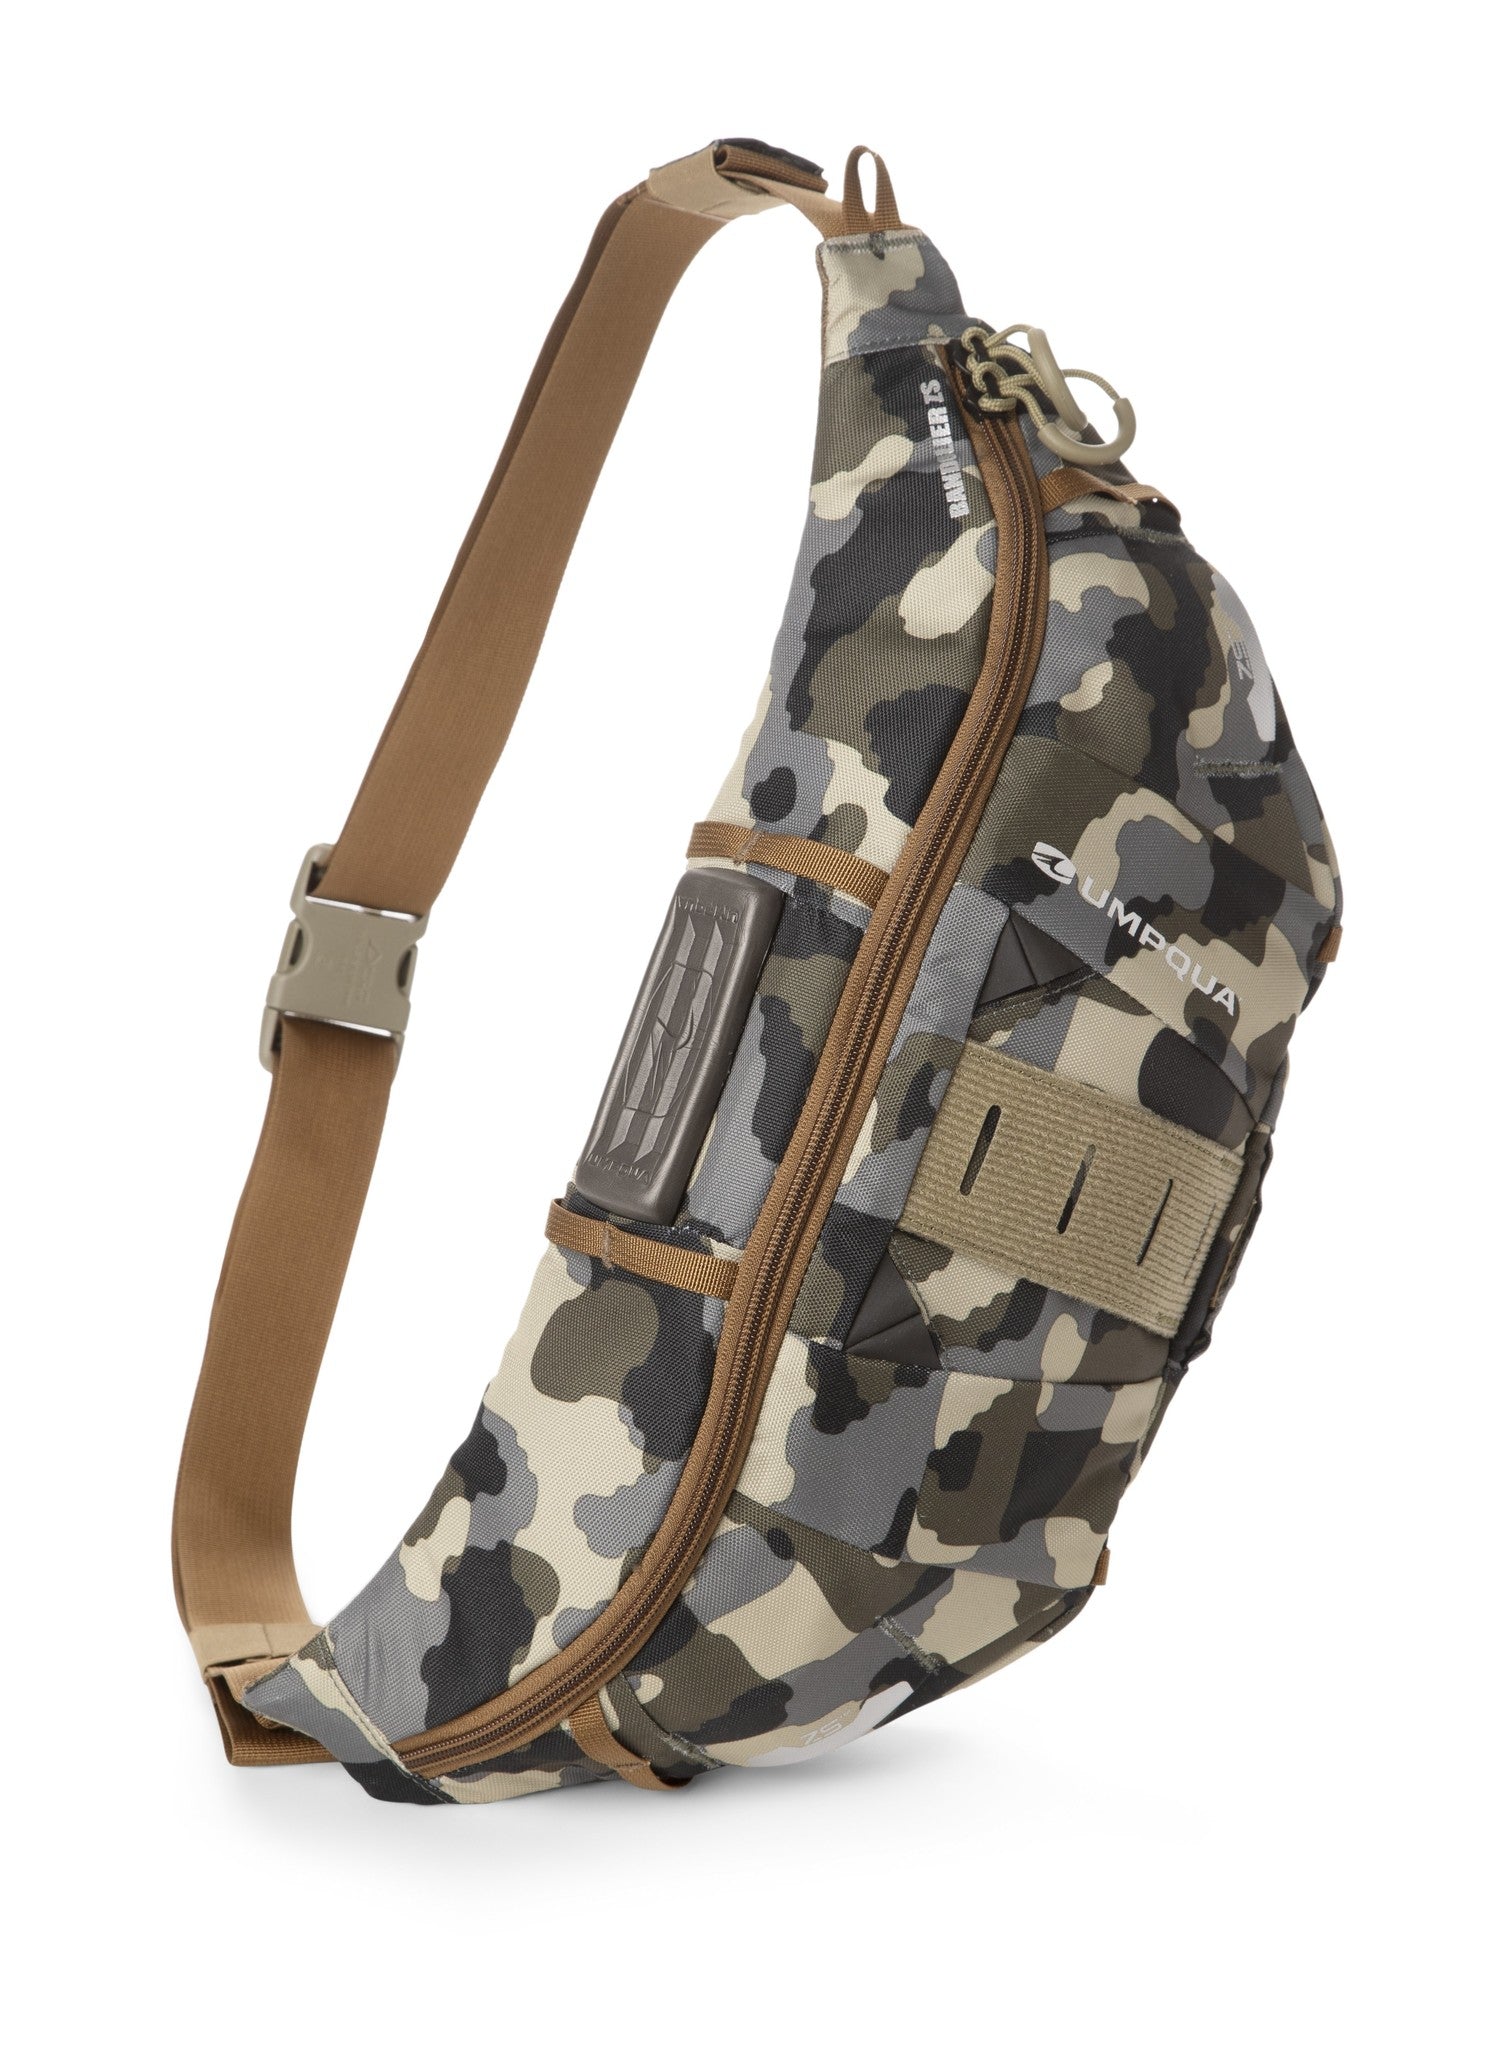 Zs2 Bandolier Sling Pack